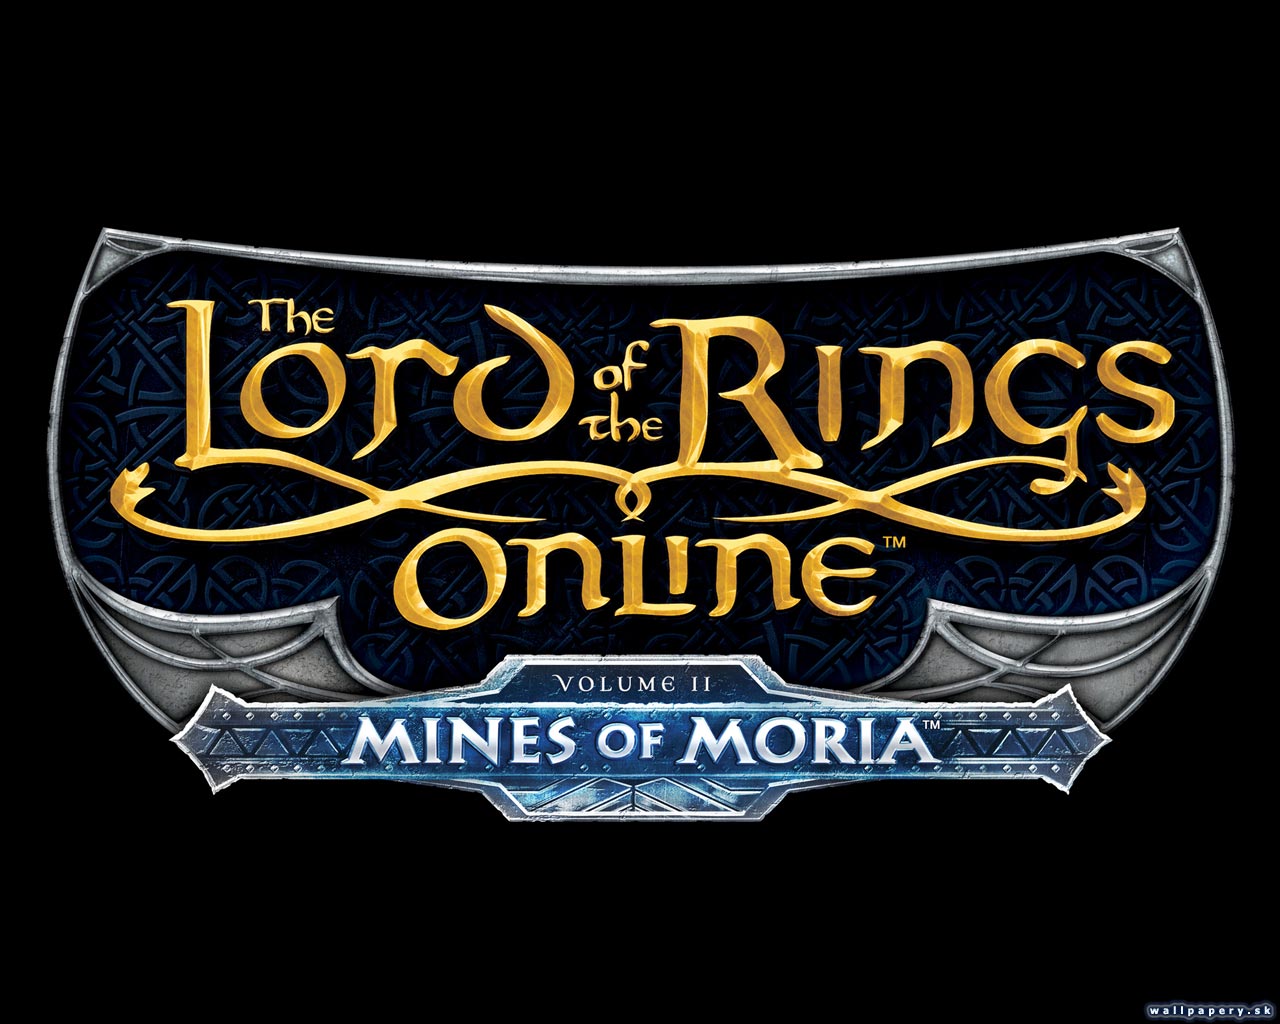 The Lord of the Rings Online: Mines of Moria - wallpaper 1